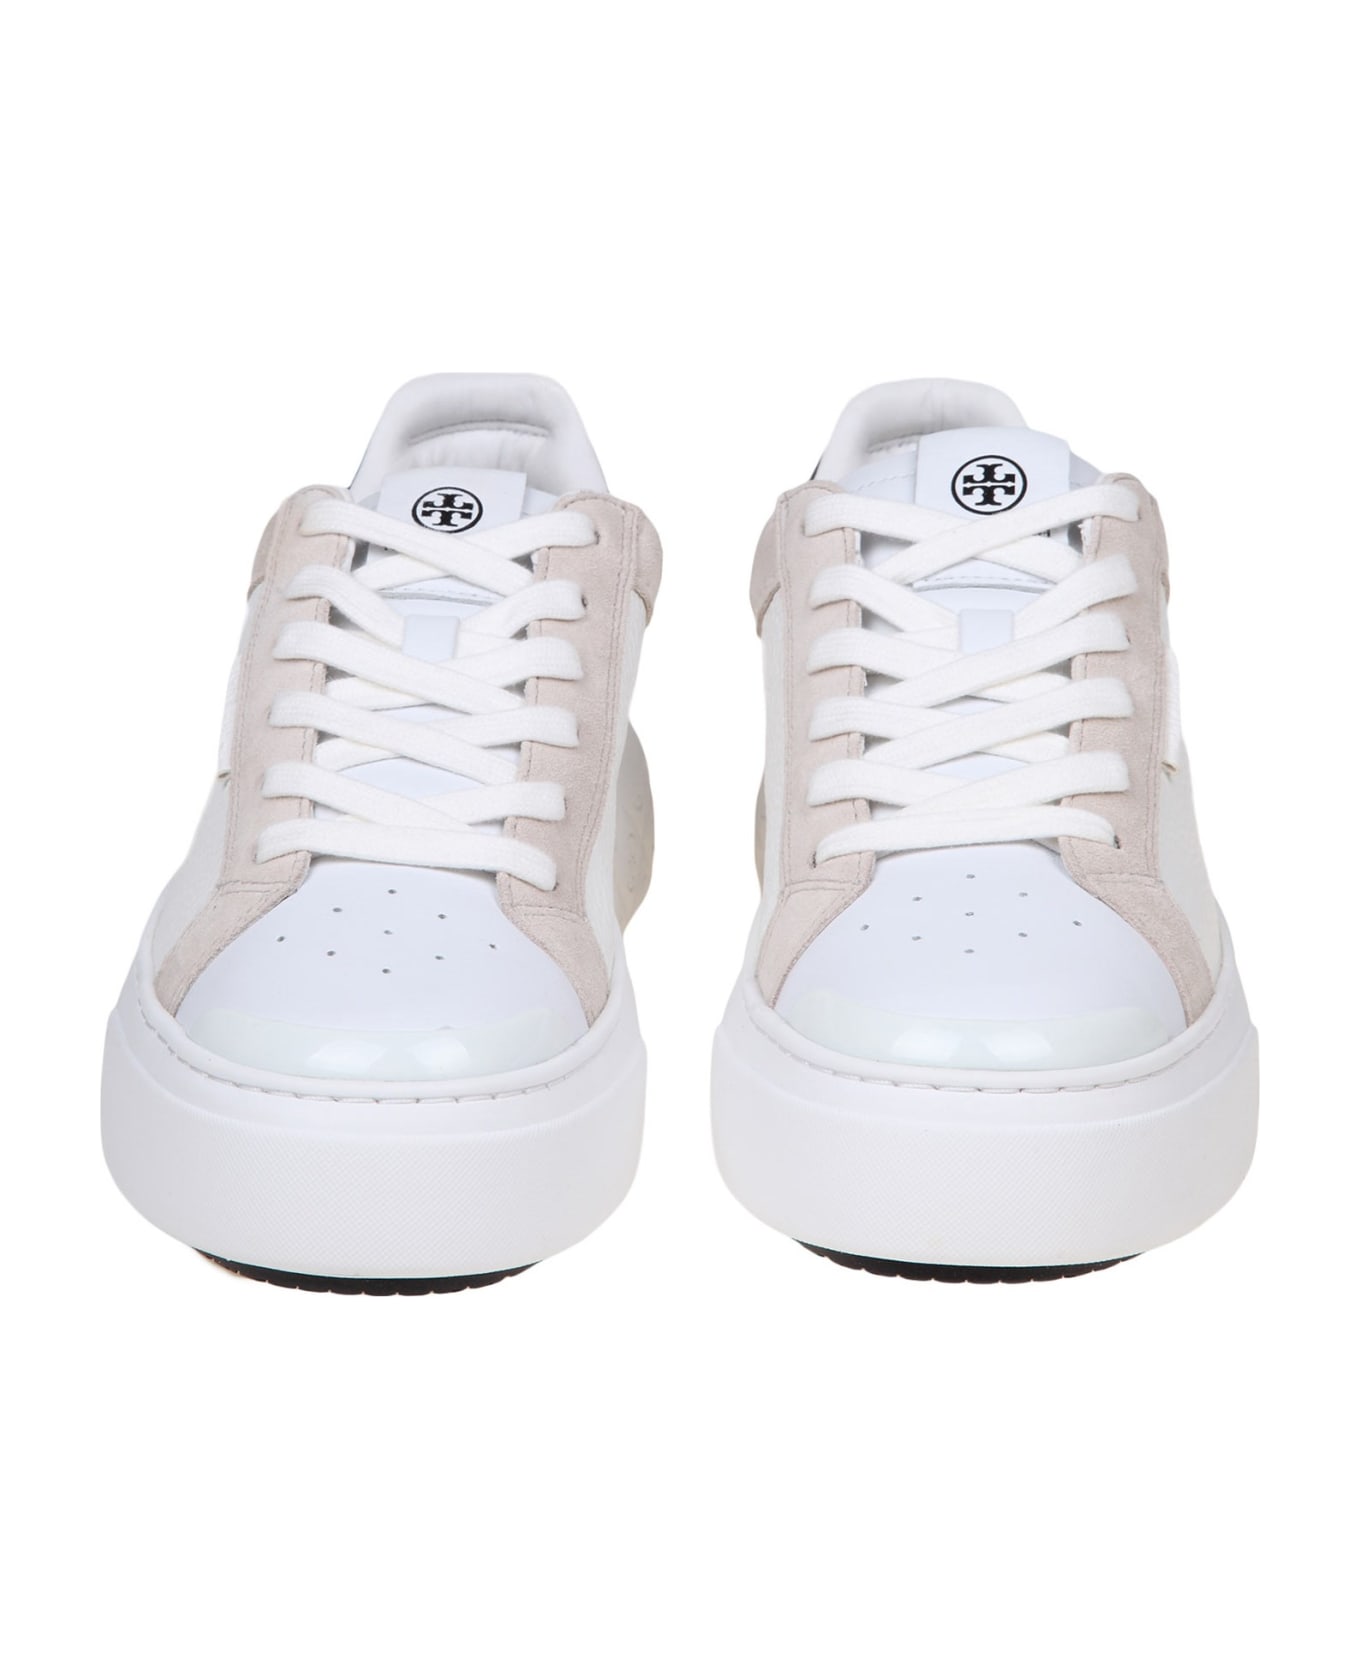 Tory Burch Ladybug Sneakers In White Suede And Leather - White/Black ウェッジシューズ